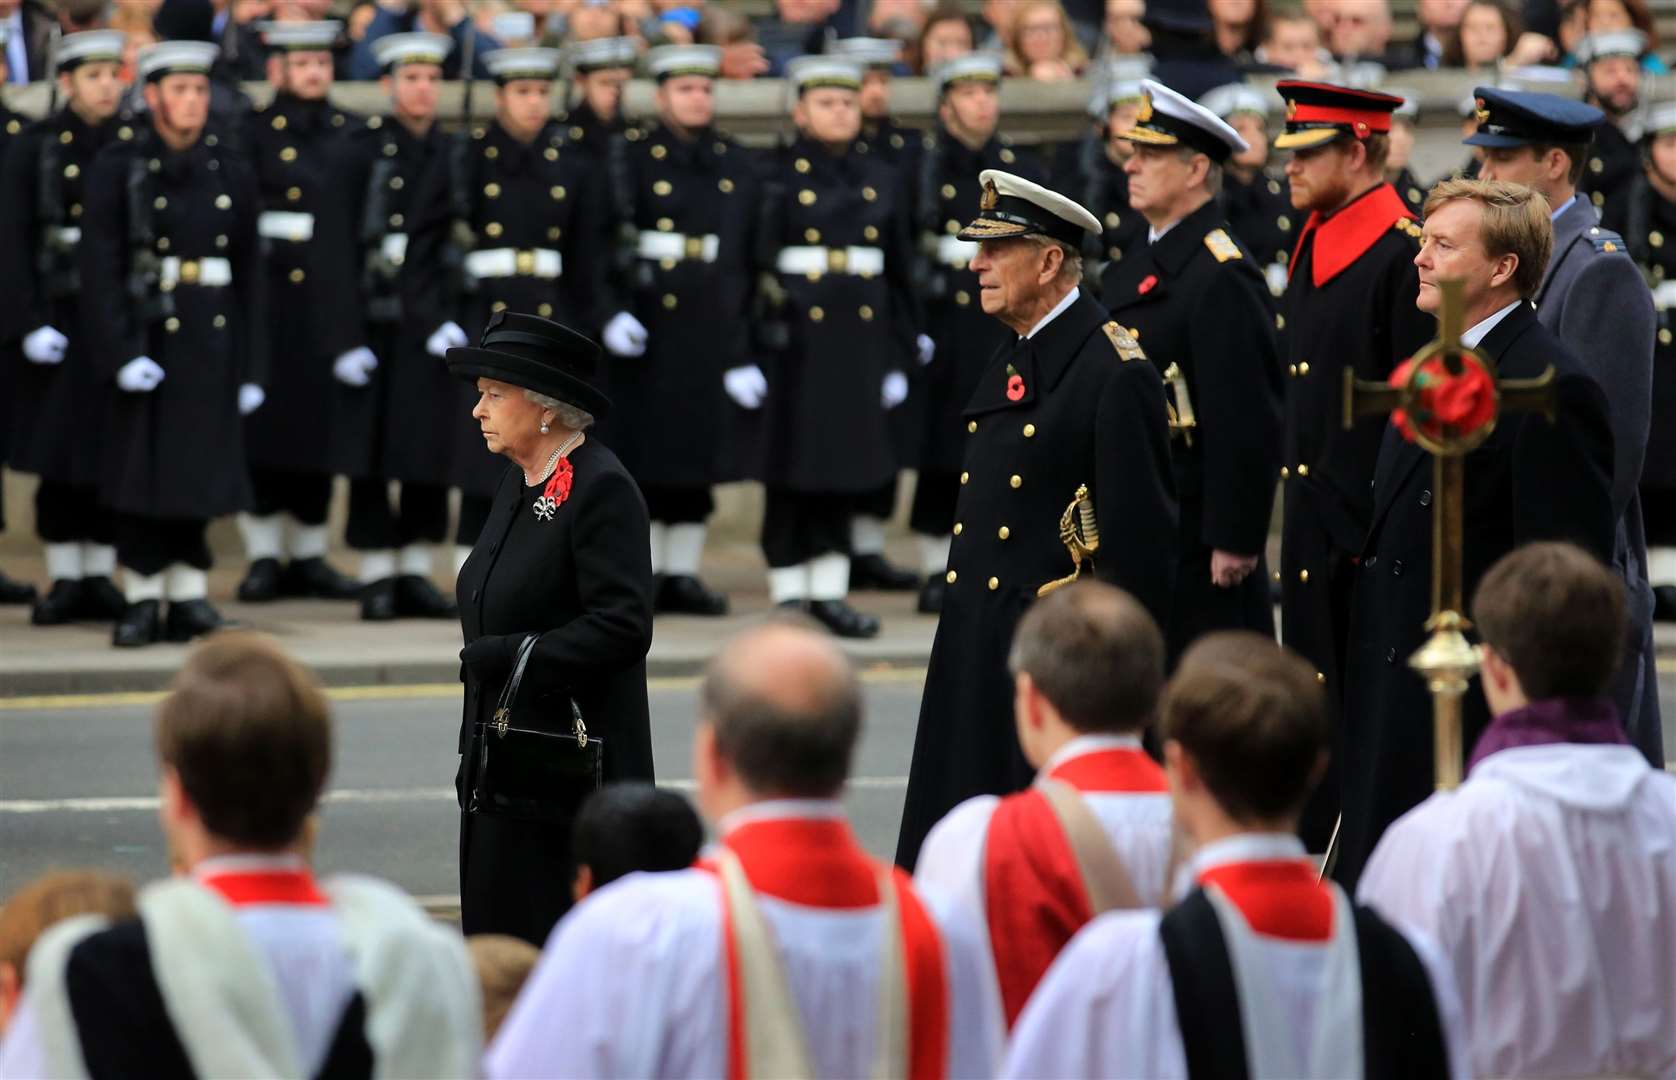 The Queen at the Cenotaph in 2013 (Gareth Fuller/PA)